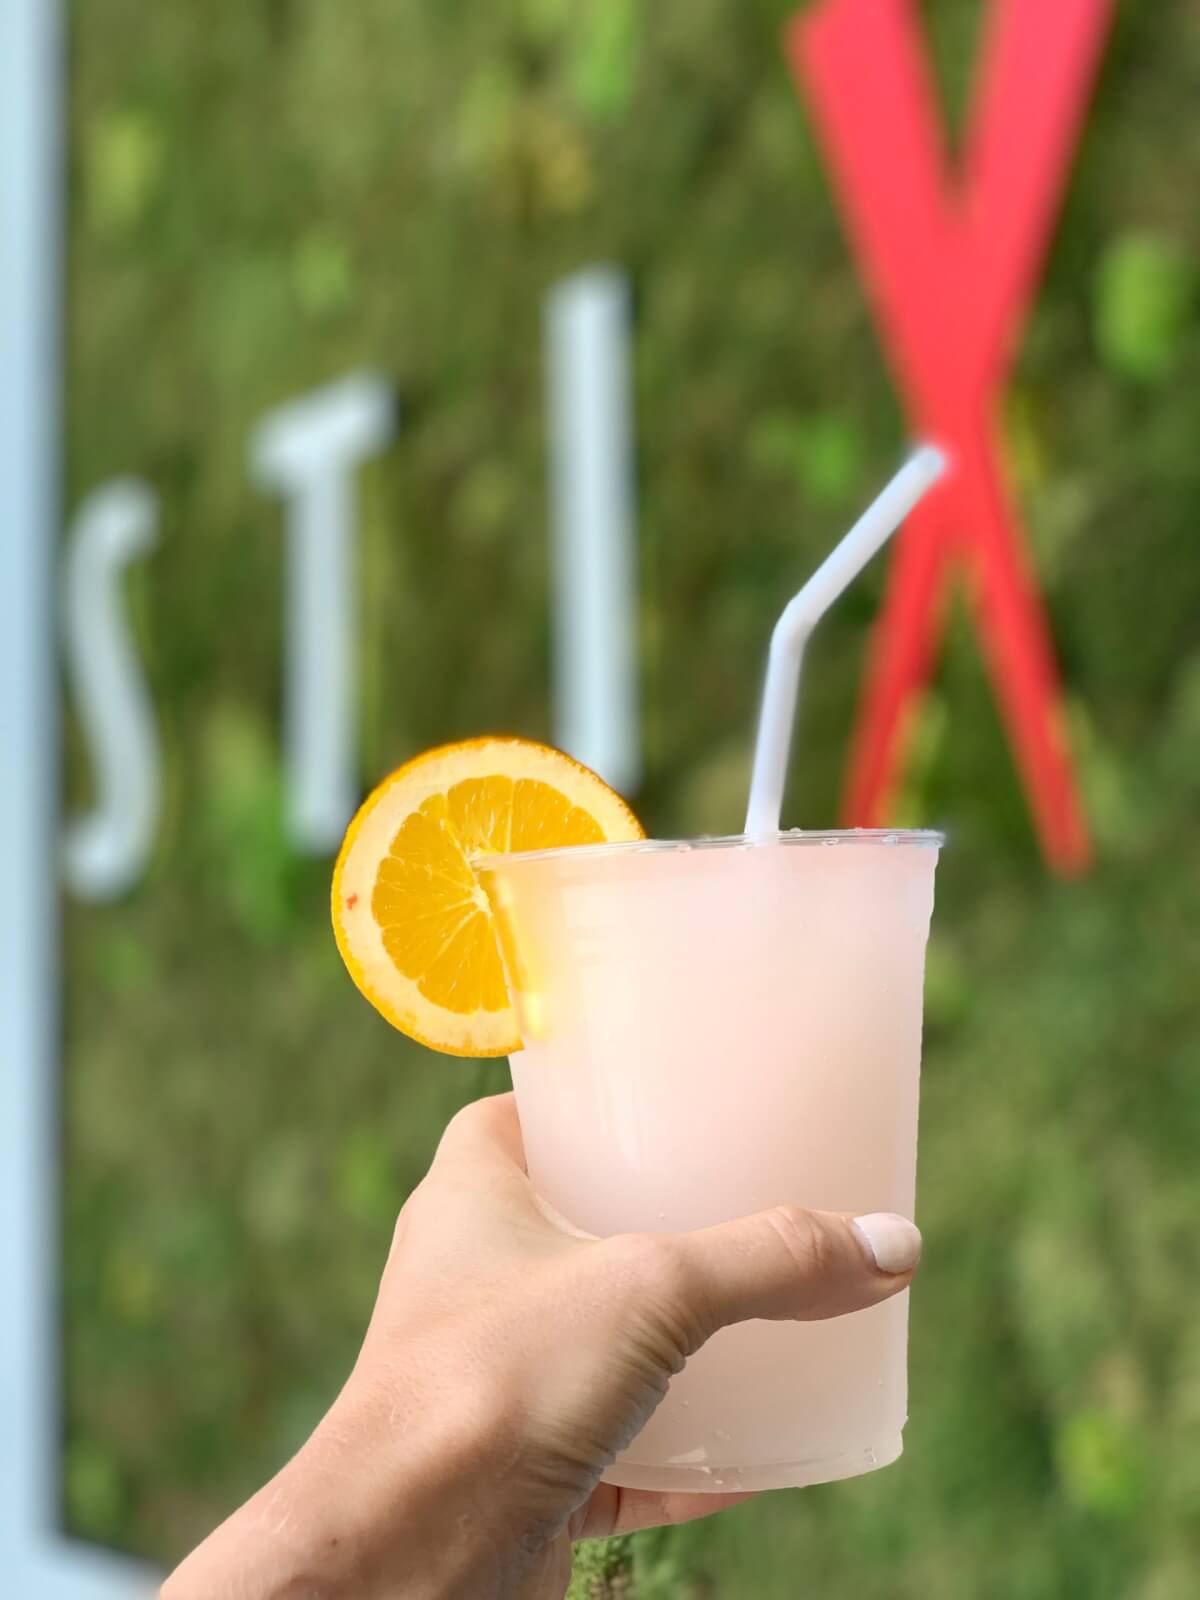 The Frozen Lemonade Sake cocktail from STIX Express in Memphis, topped with an orange peel